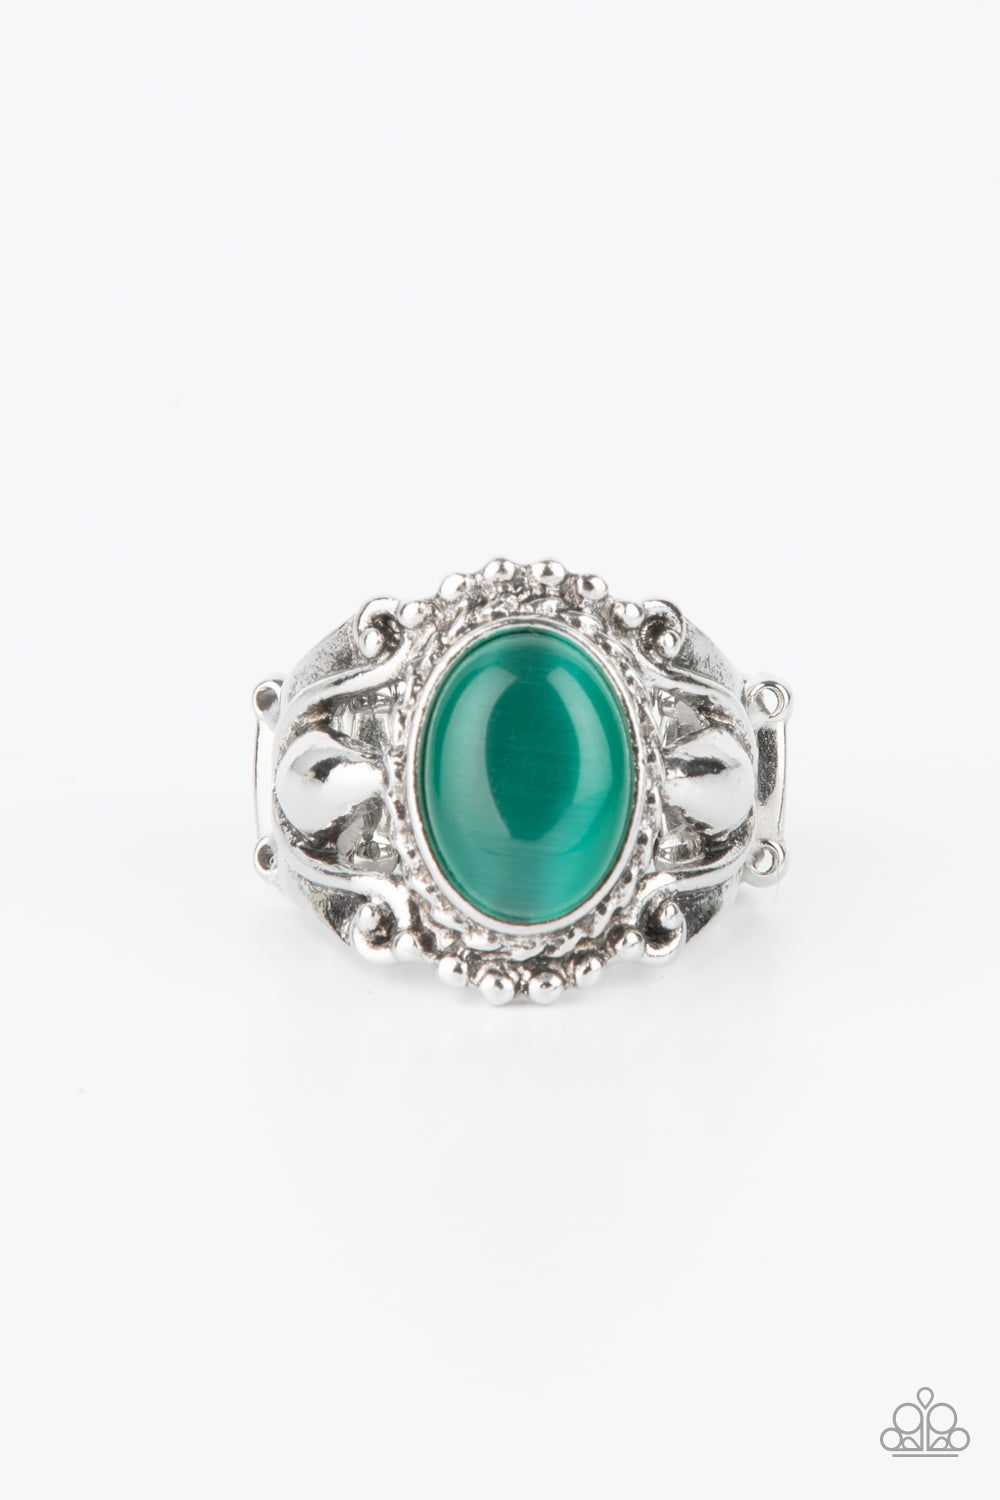 Jubilant Gem Green Ring - Paparazzi Accessories  A polished green cat's eye stone creates a jubilant statement as it rests inside a studded silver frame atop an airy pedestal like band. Features a stretchy band for a flexible fit.  All Paparazzi Accessories are lead free and nickel free!  Sold as one individual ring.